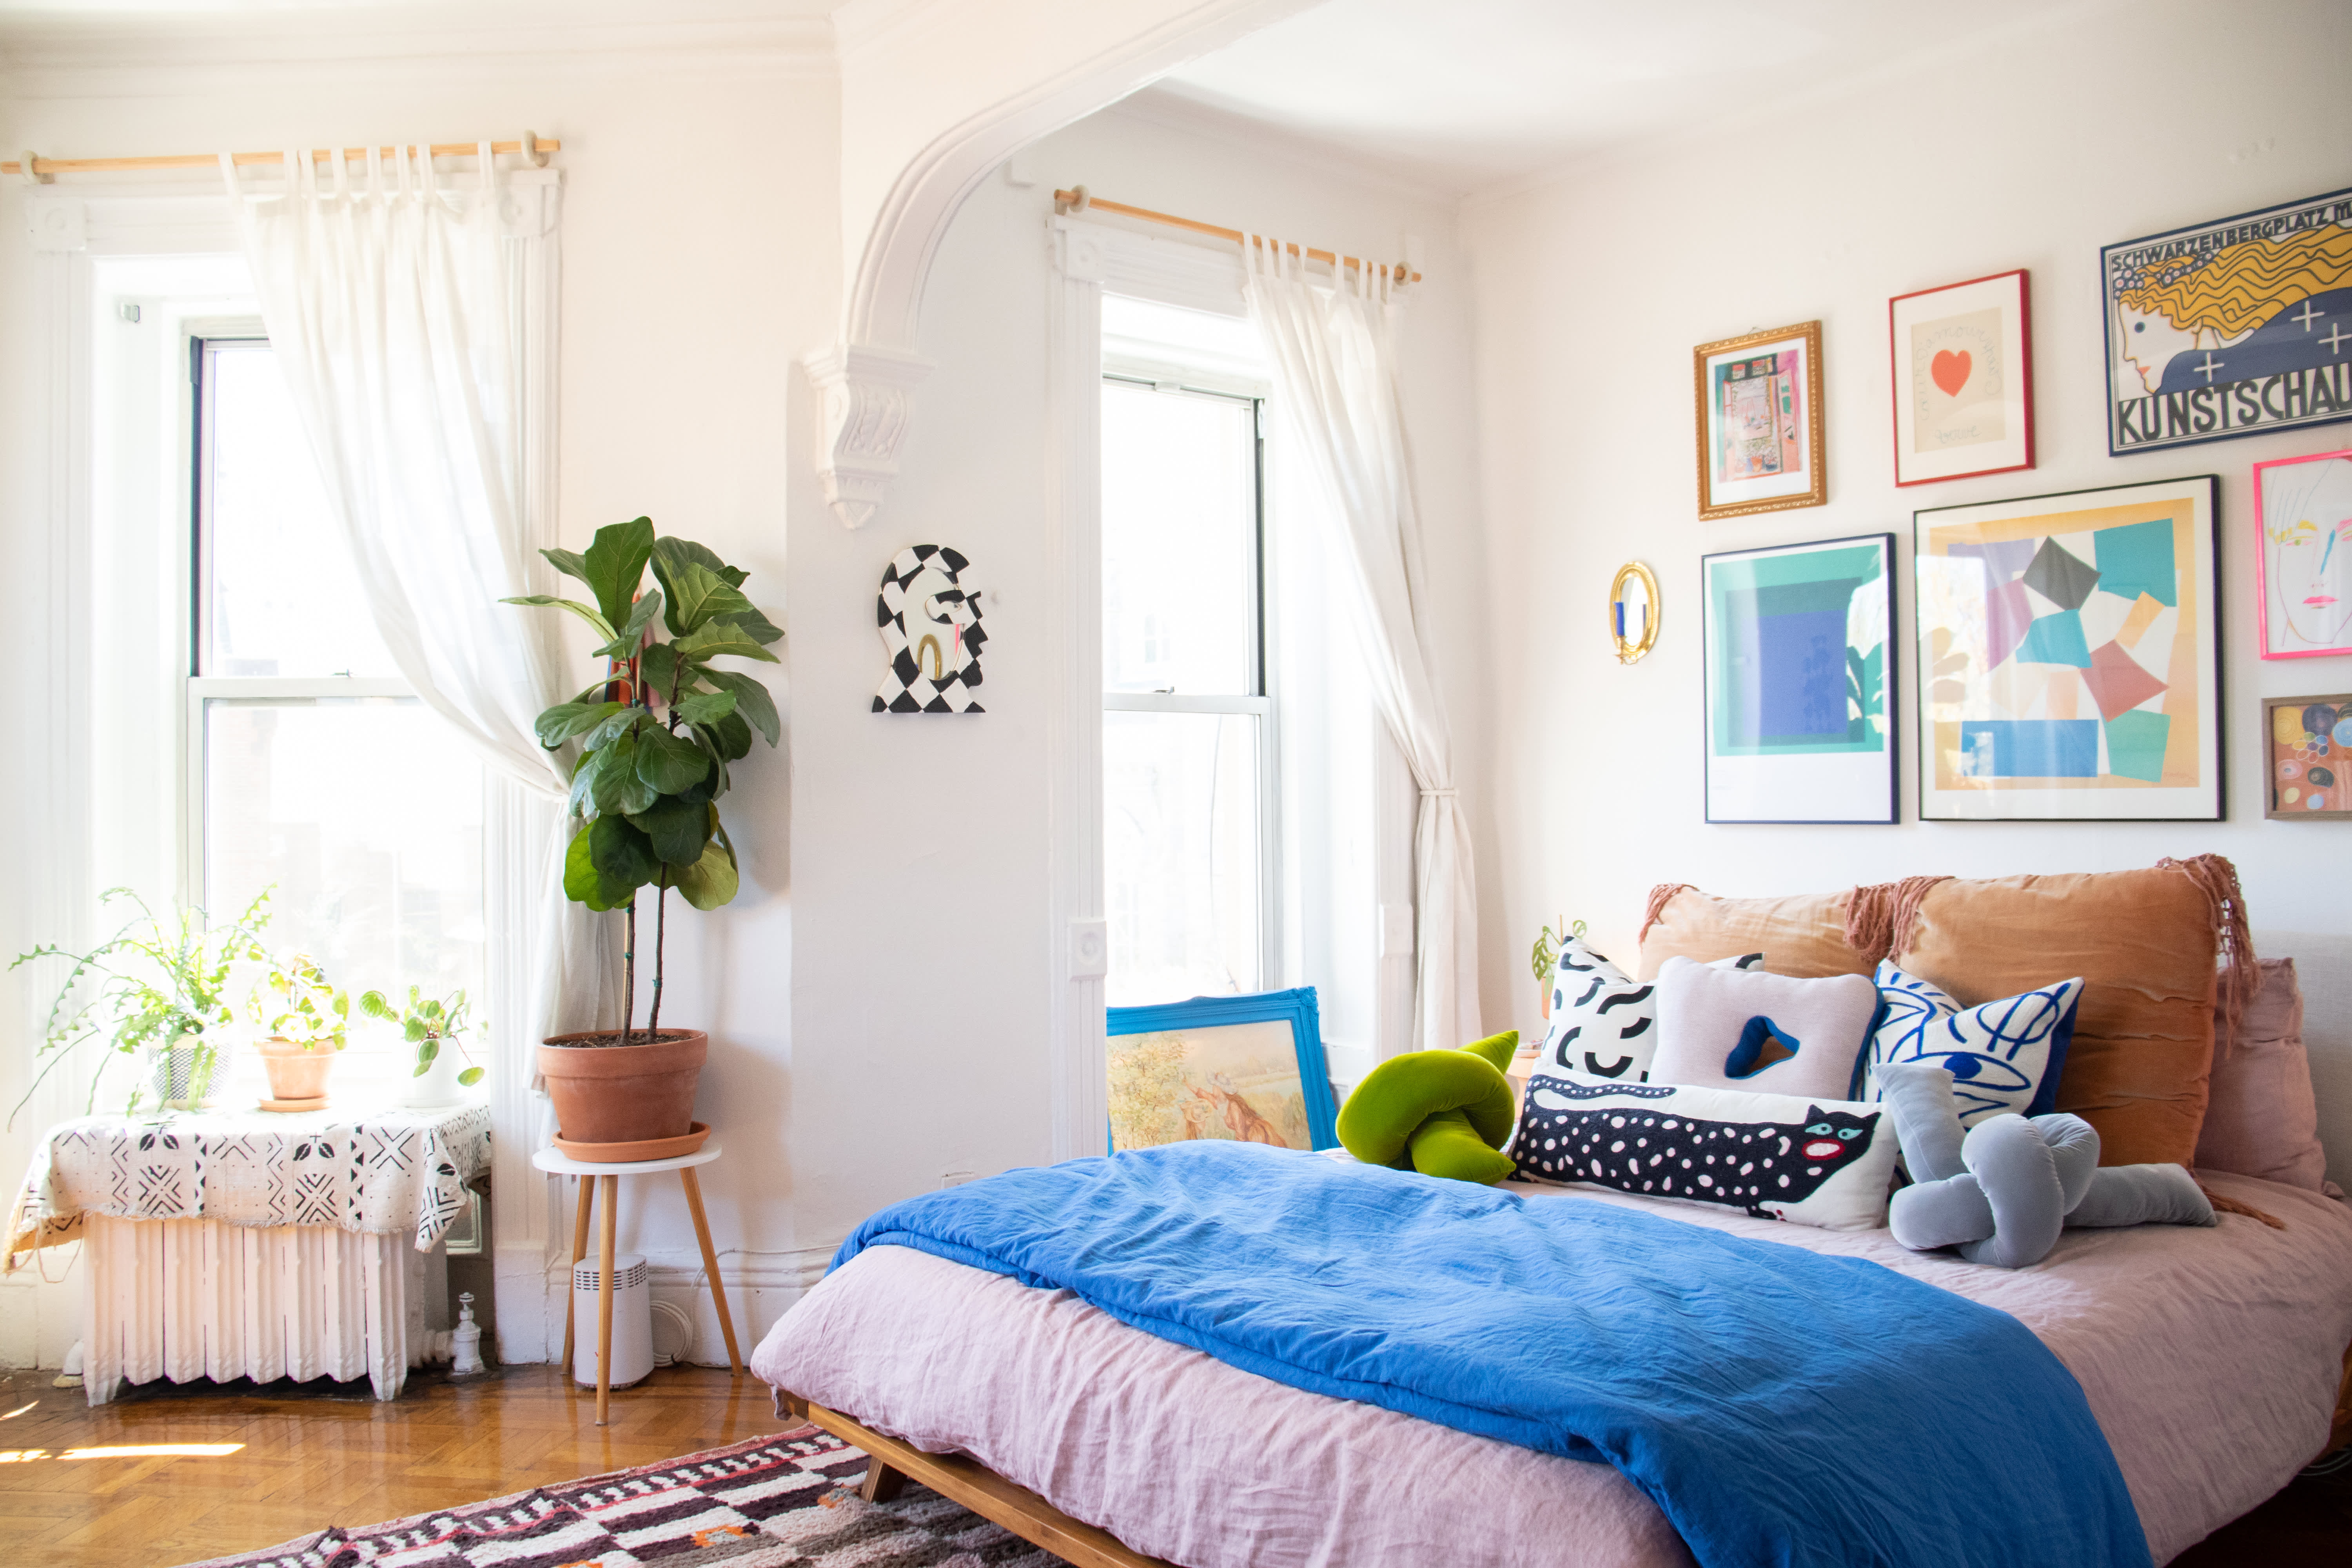 These Are The Top Bedroom Decor Trends For 2022, According to ...